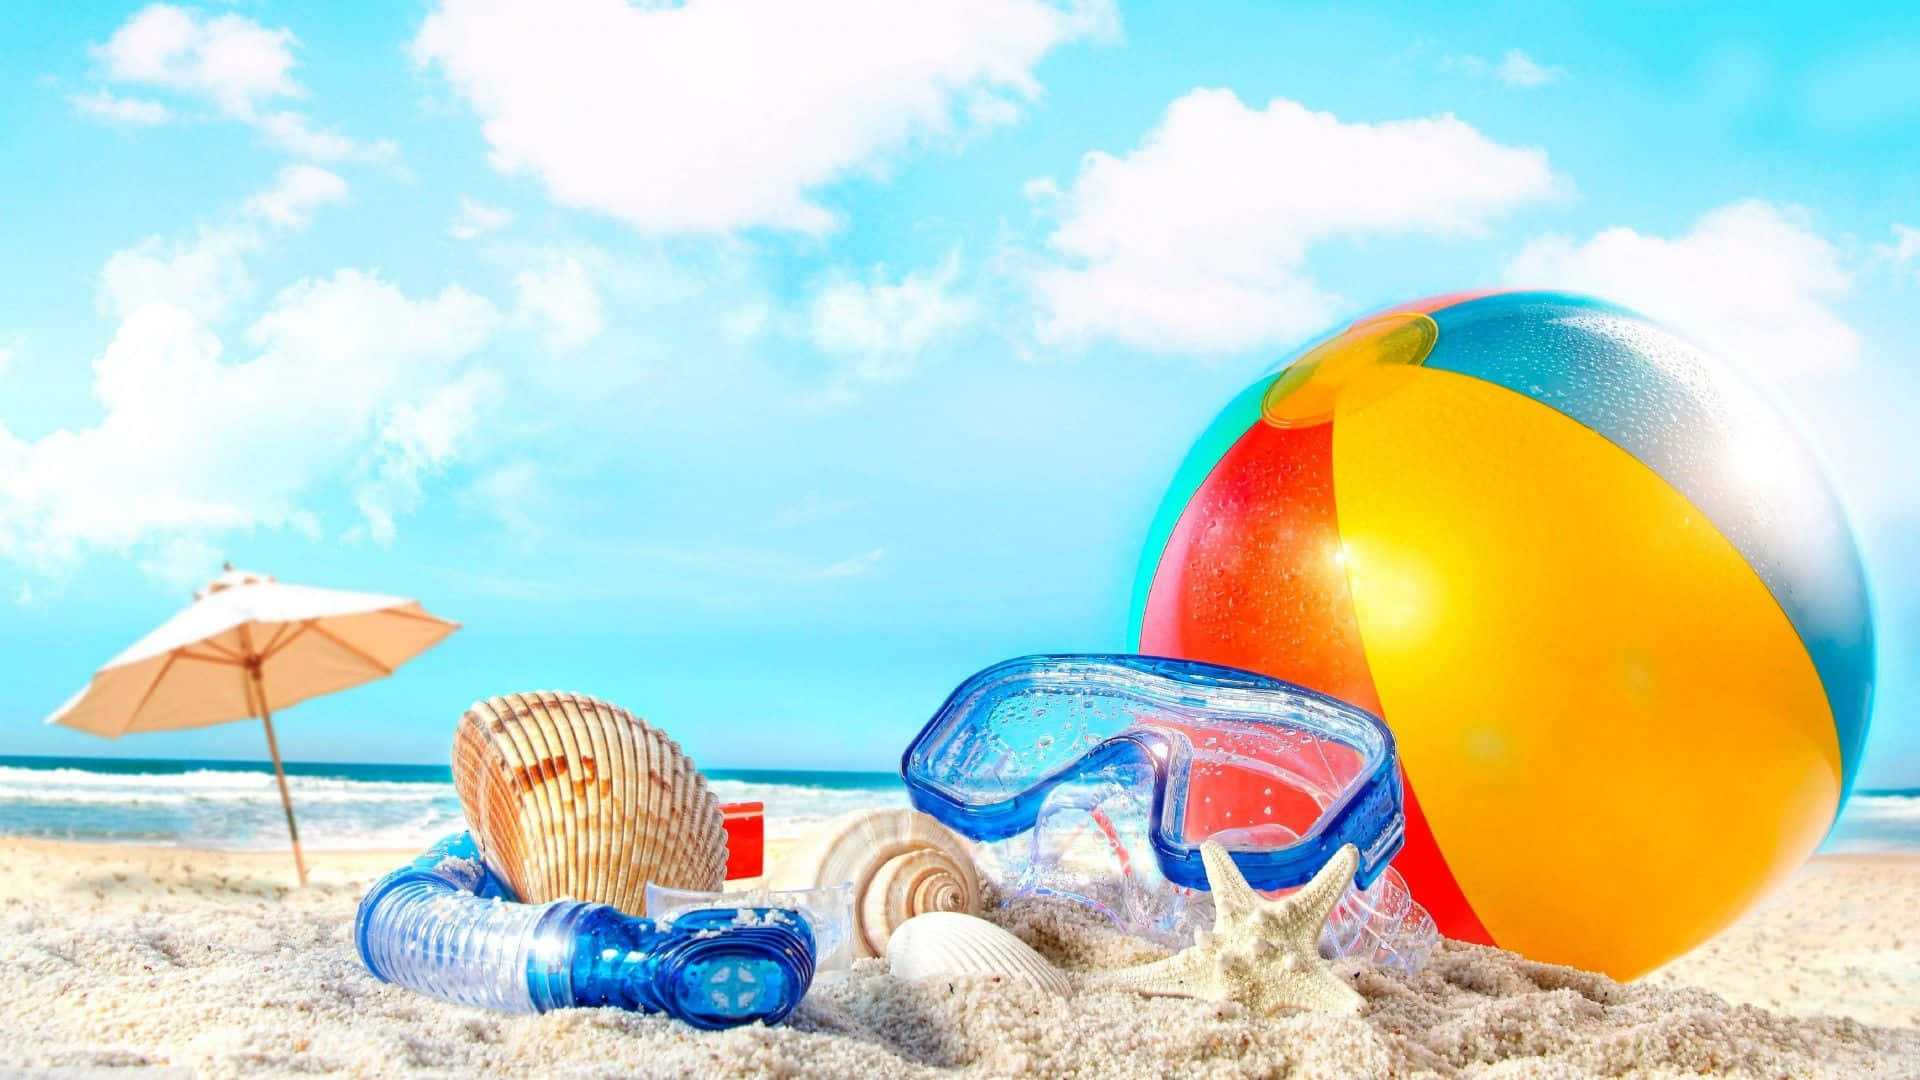 Cool Summer Beach Toys Background